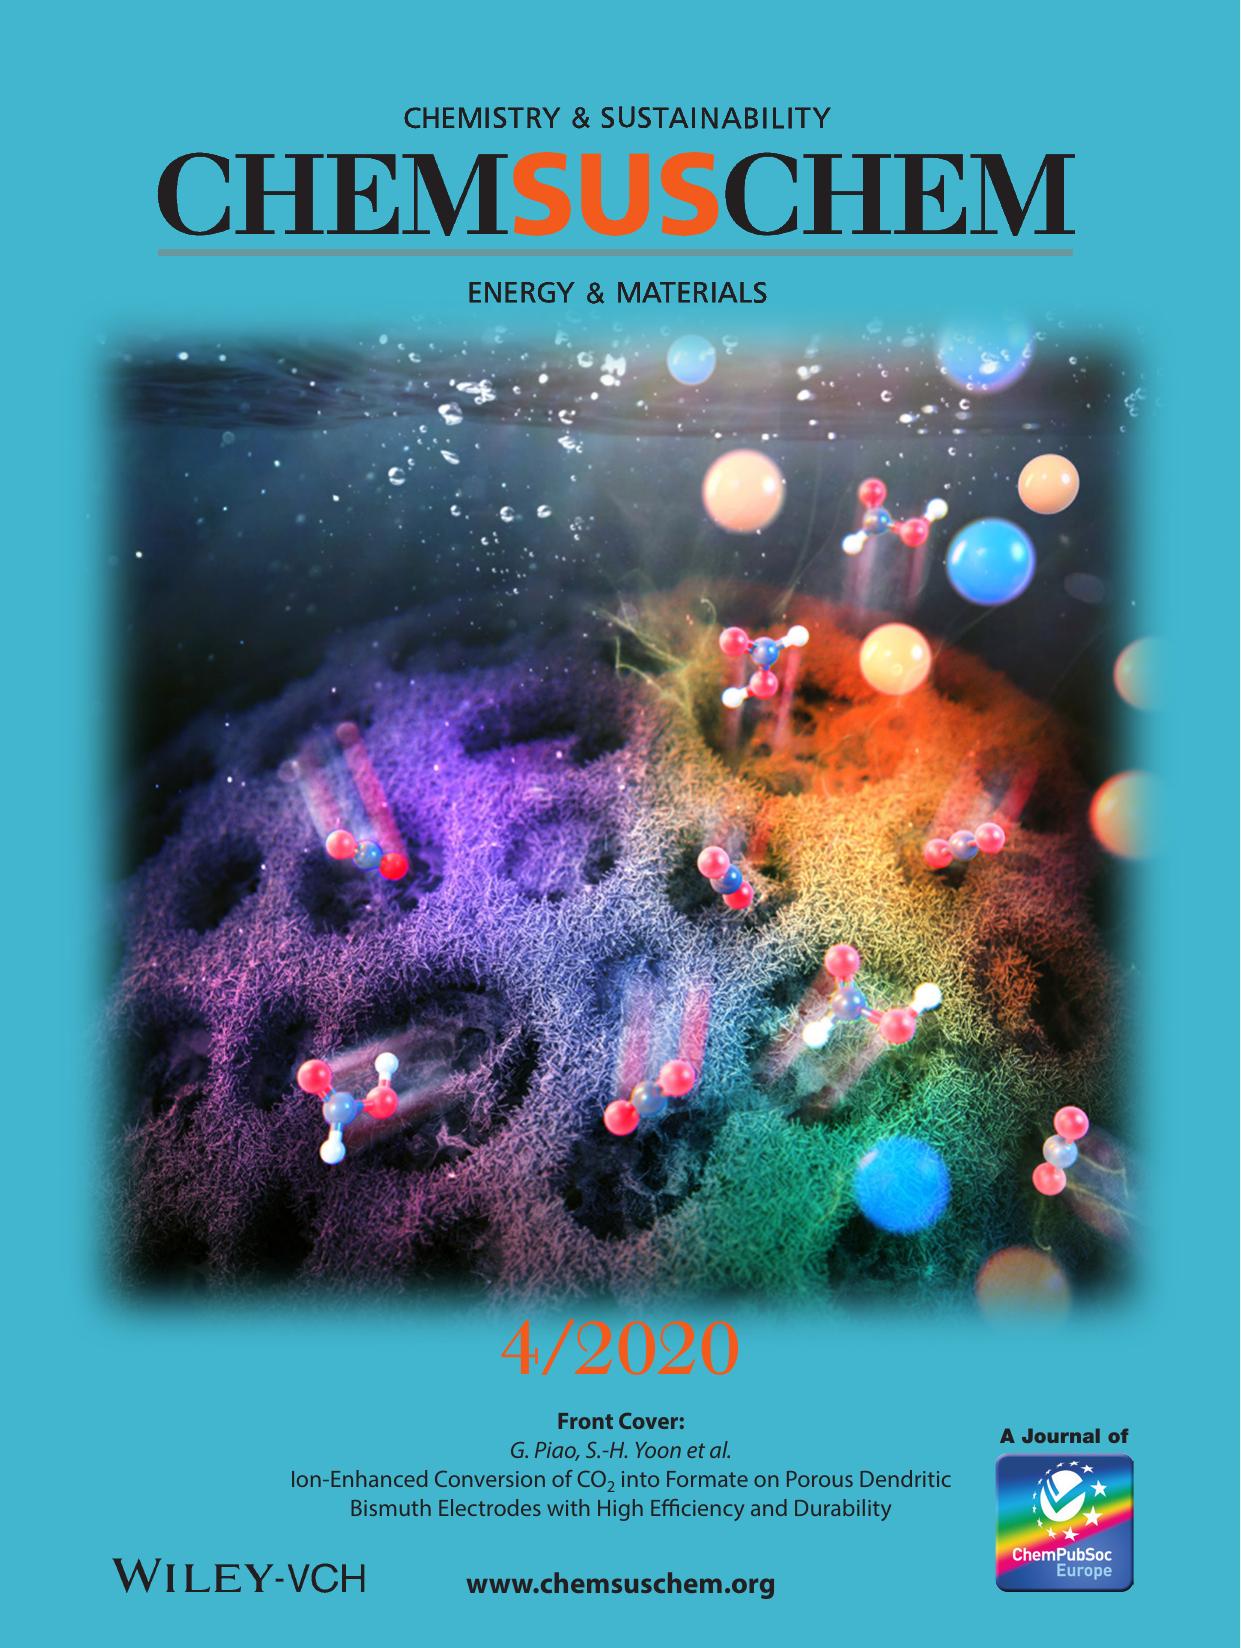 Front Cover: IonâEnhanced Conversion of CO2 into Formate on Porous Dendritic Bismuth Electrodes with High Efficiency and Durability (ChemSusChem 42020) by Unknown